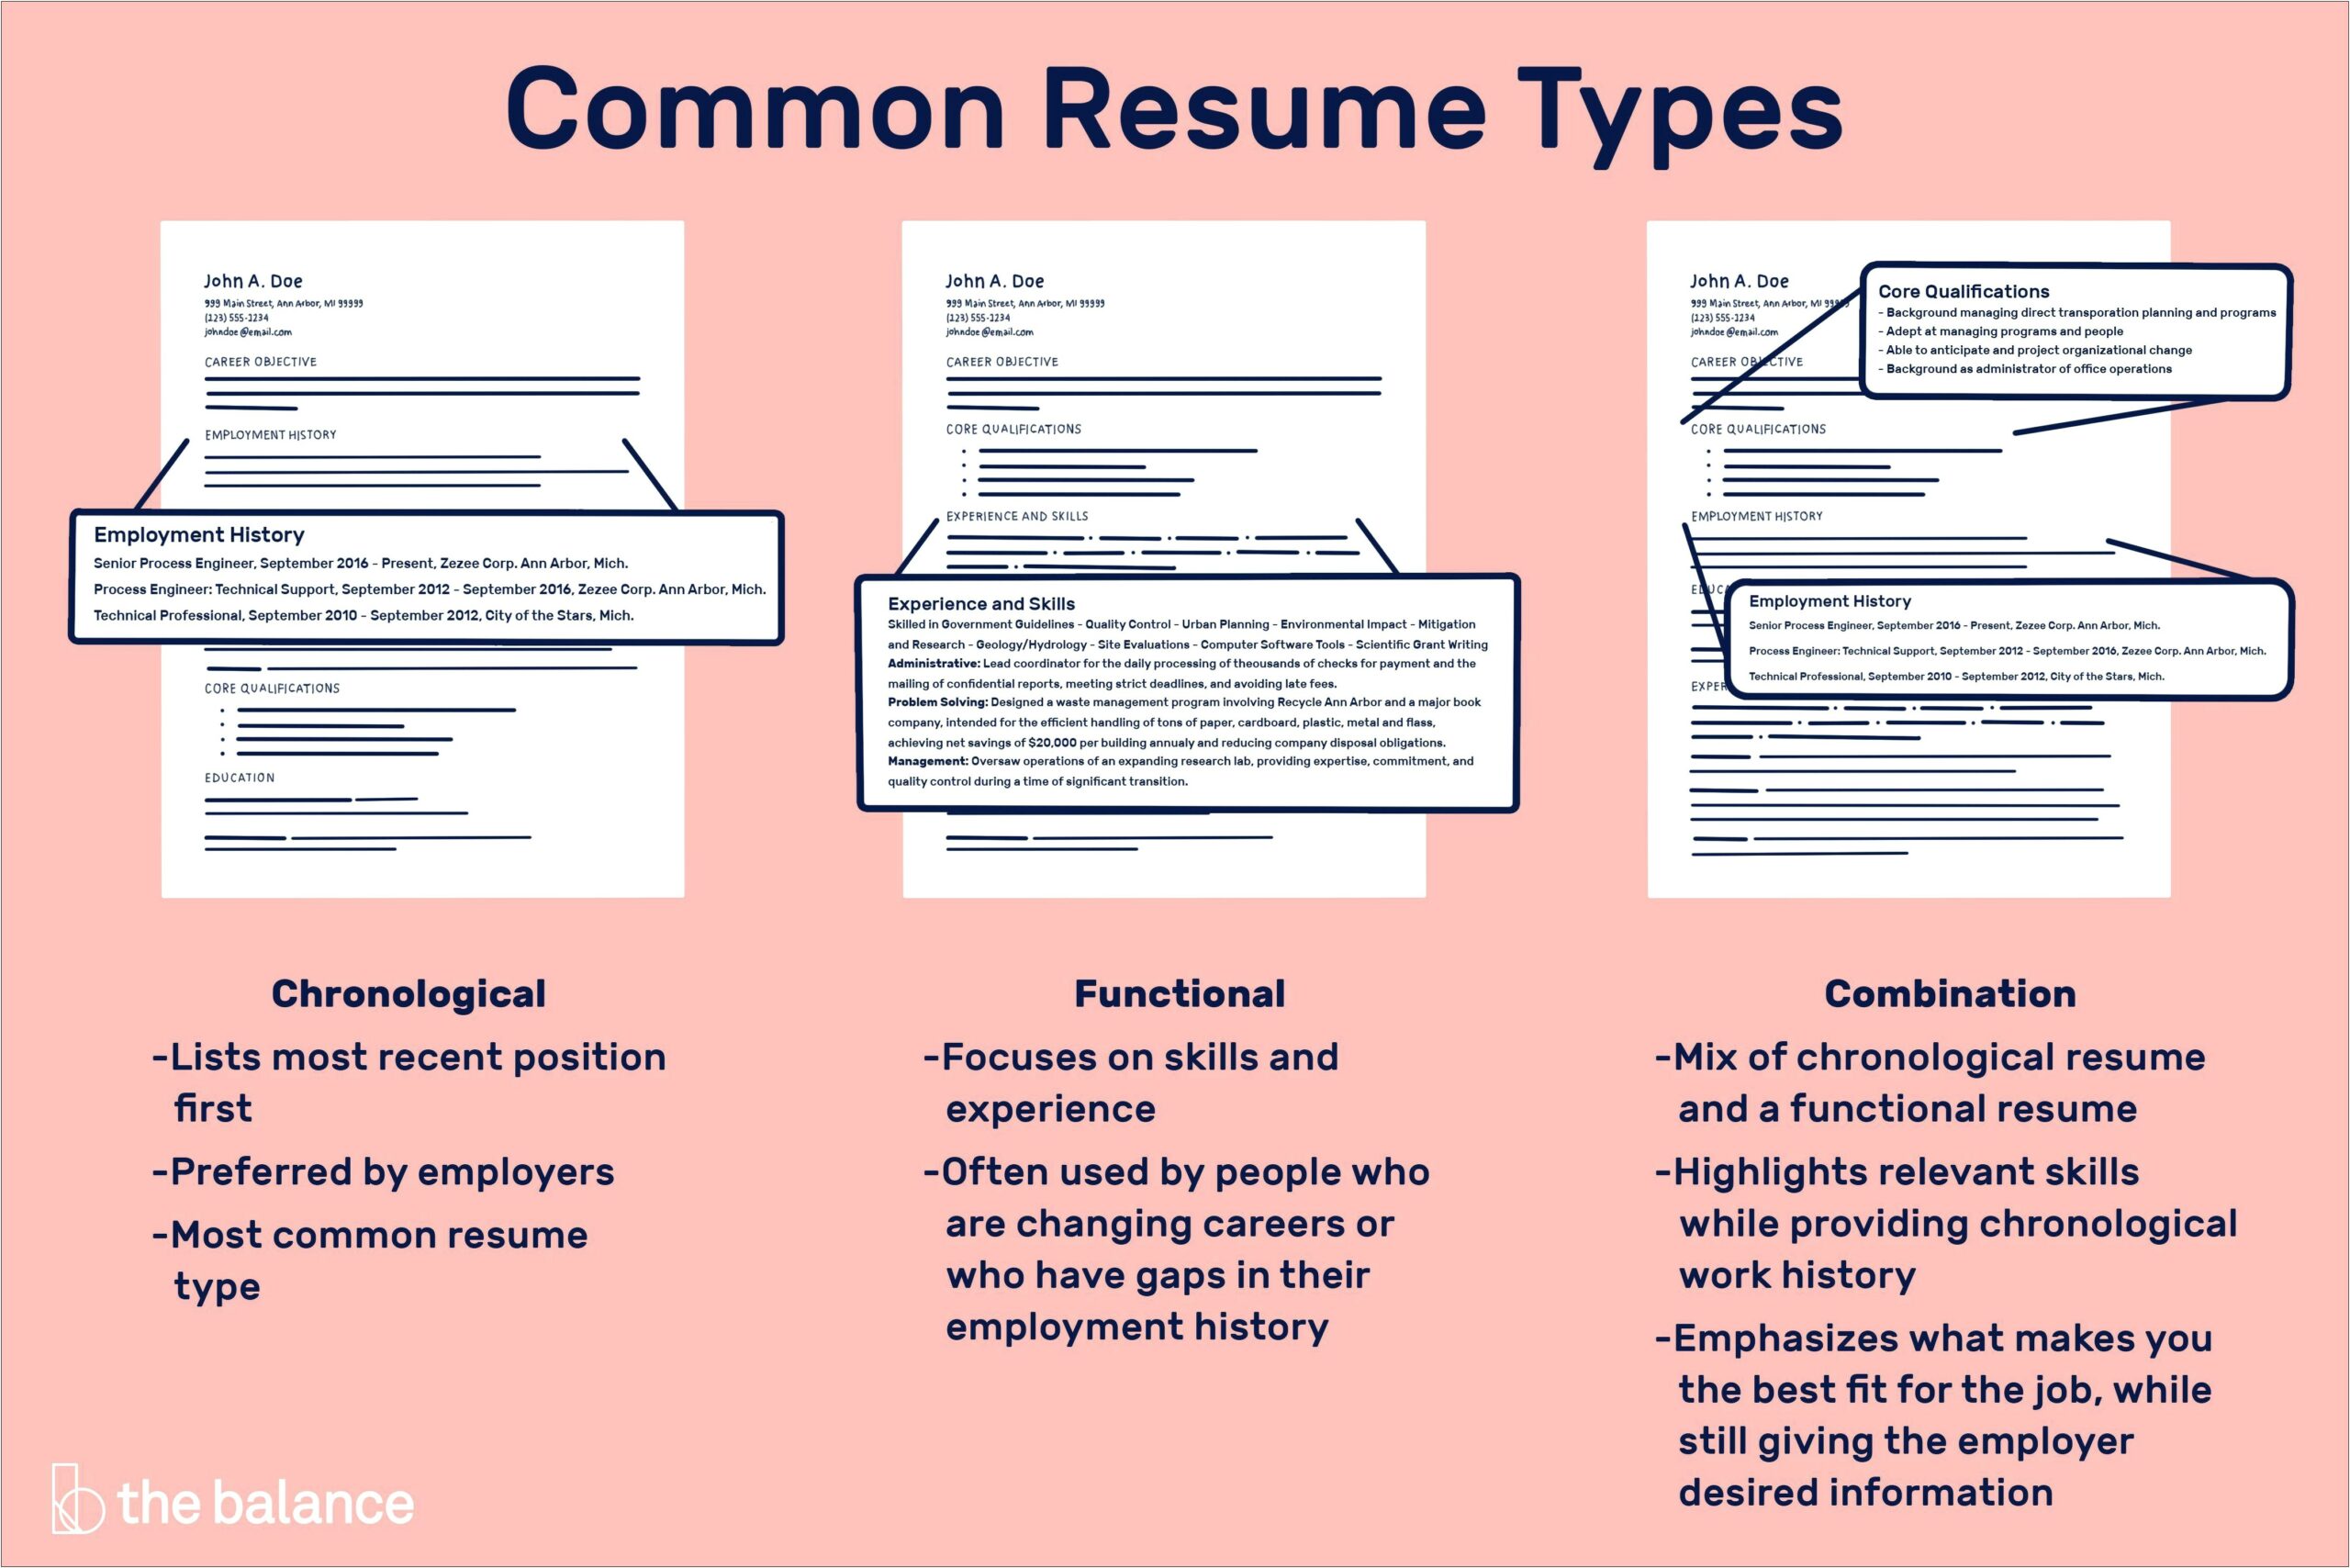 Similar Terms To Time Or Experience For Resumes